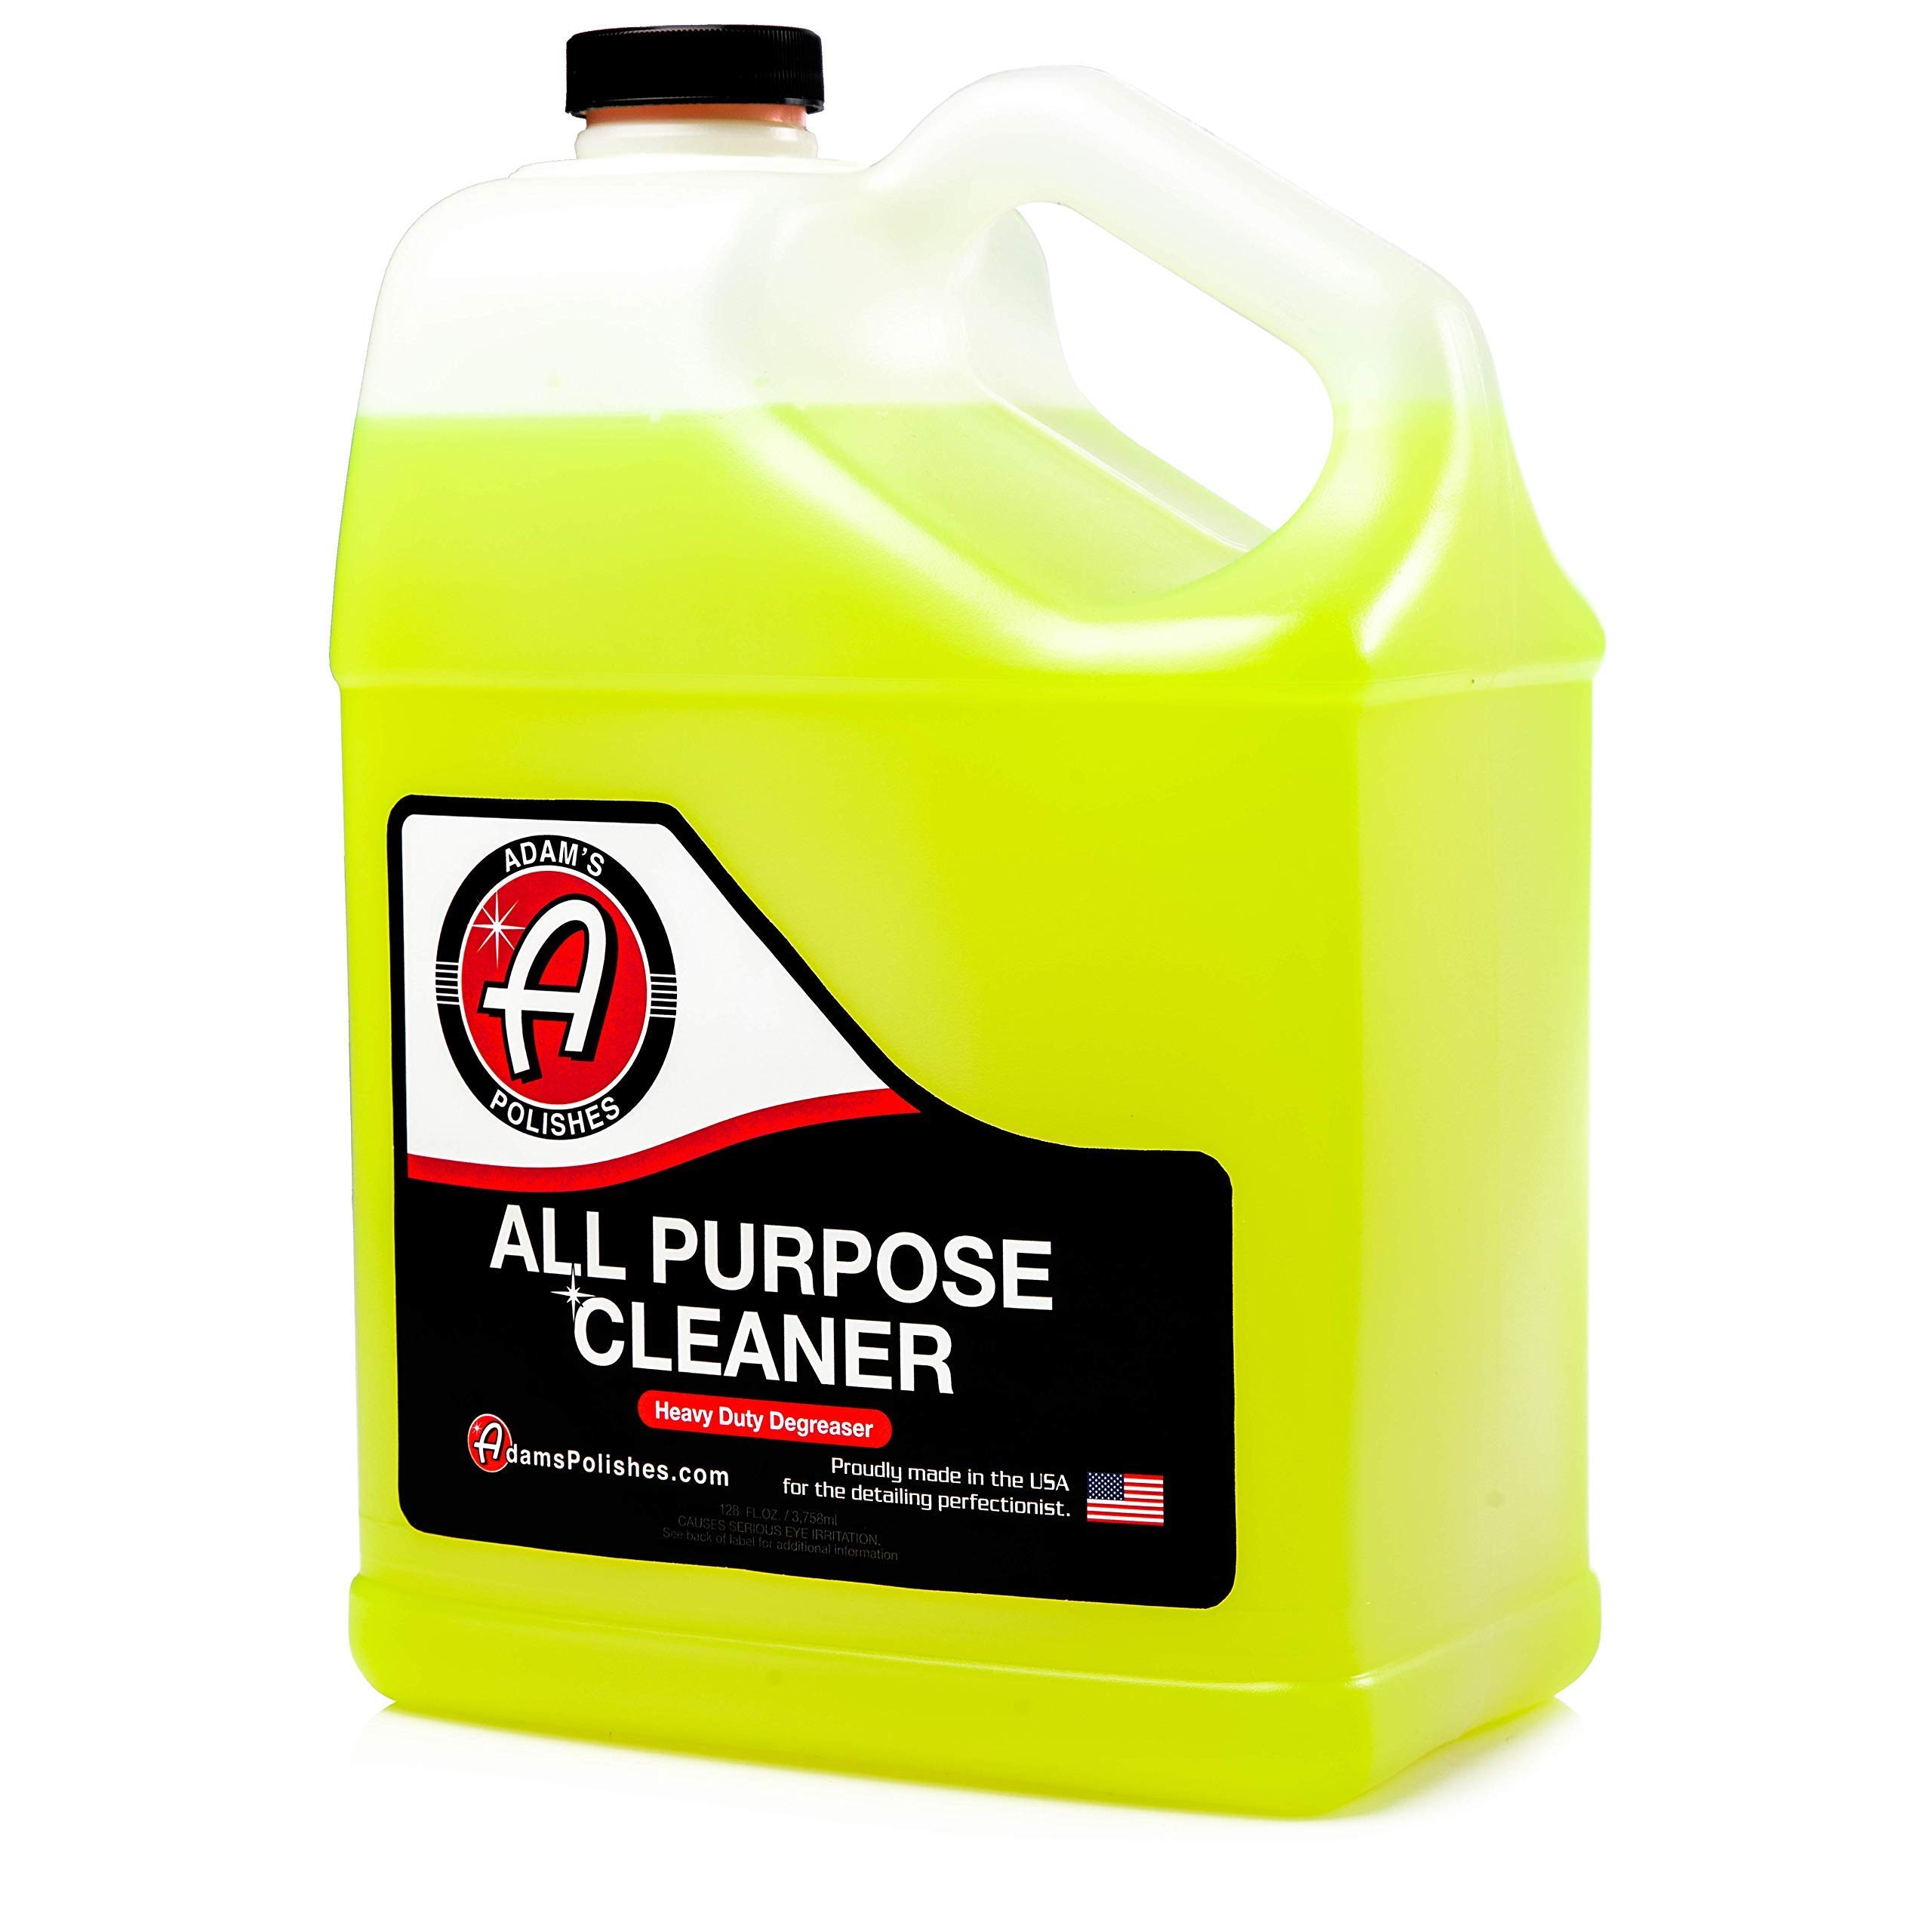 Adam's Heavy Duty All Purpose Cleaner & Degreaser - Powerful, Professional Strength Formula That Easily Cuts Heavy Grease & Tar, Tire Cleaner, ...